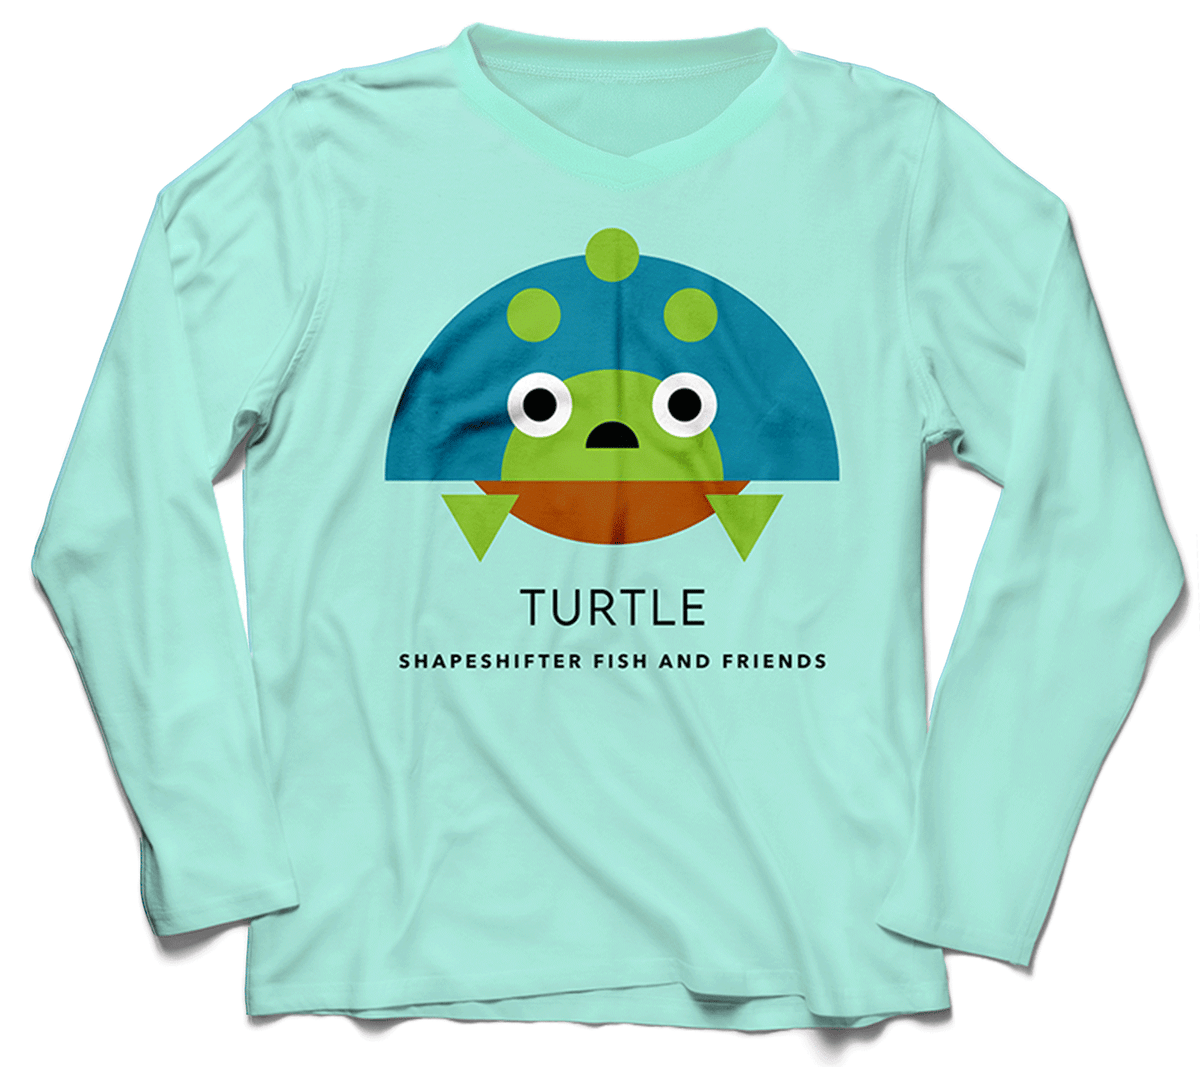 Seagrass Green Turtle UPF50+ Sun Protective Long Sleeve Shirt | Shapeshifter Fish and Friends 3T